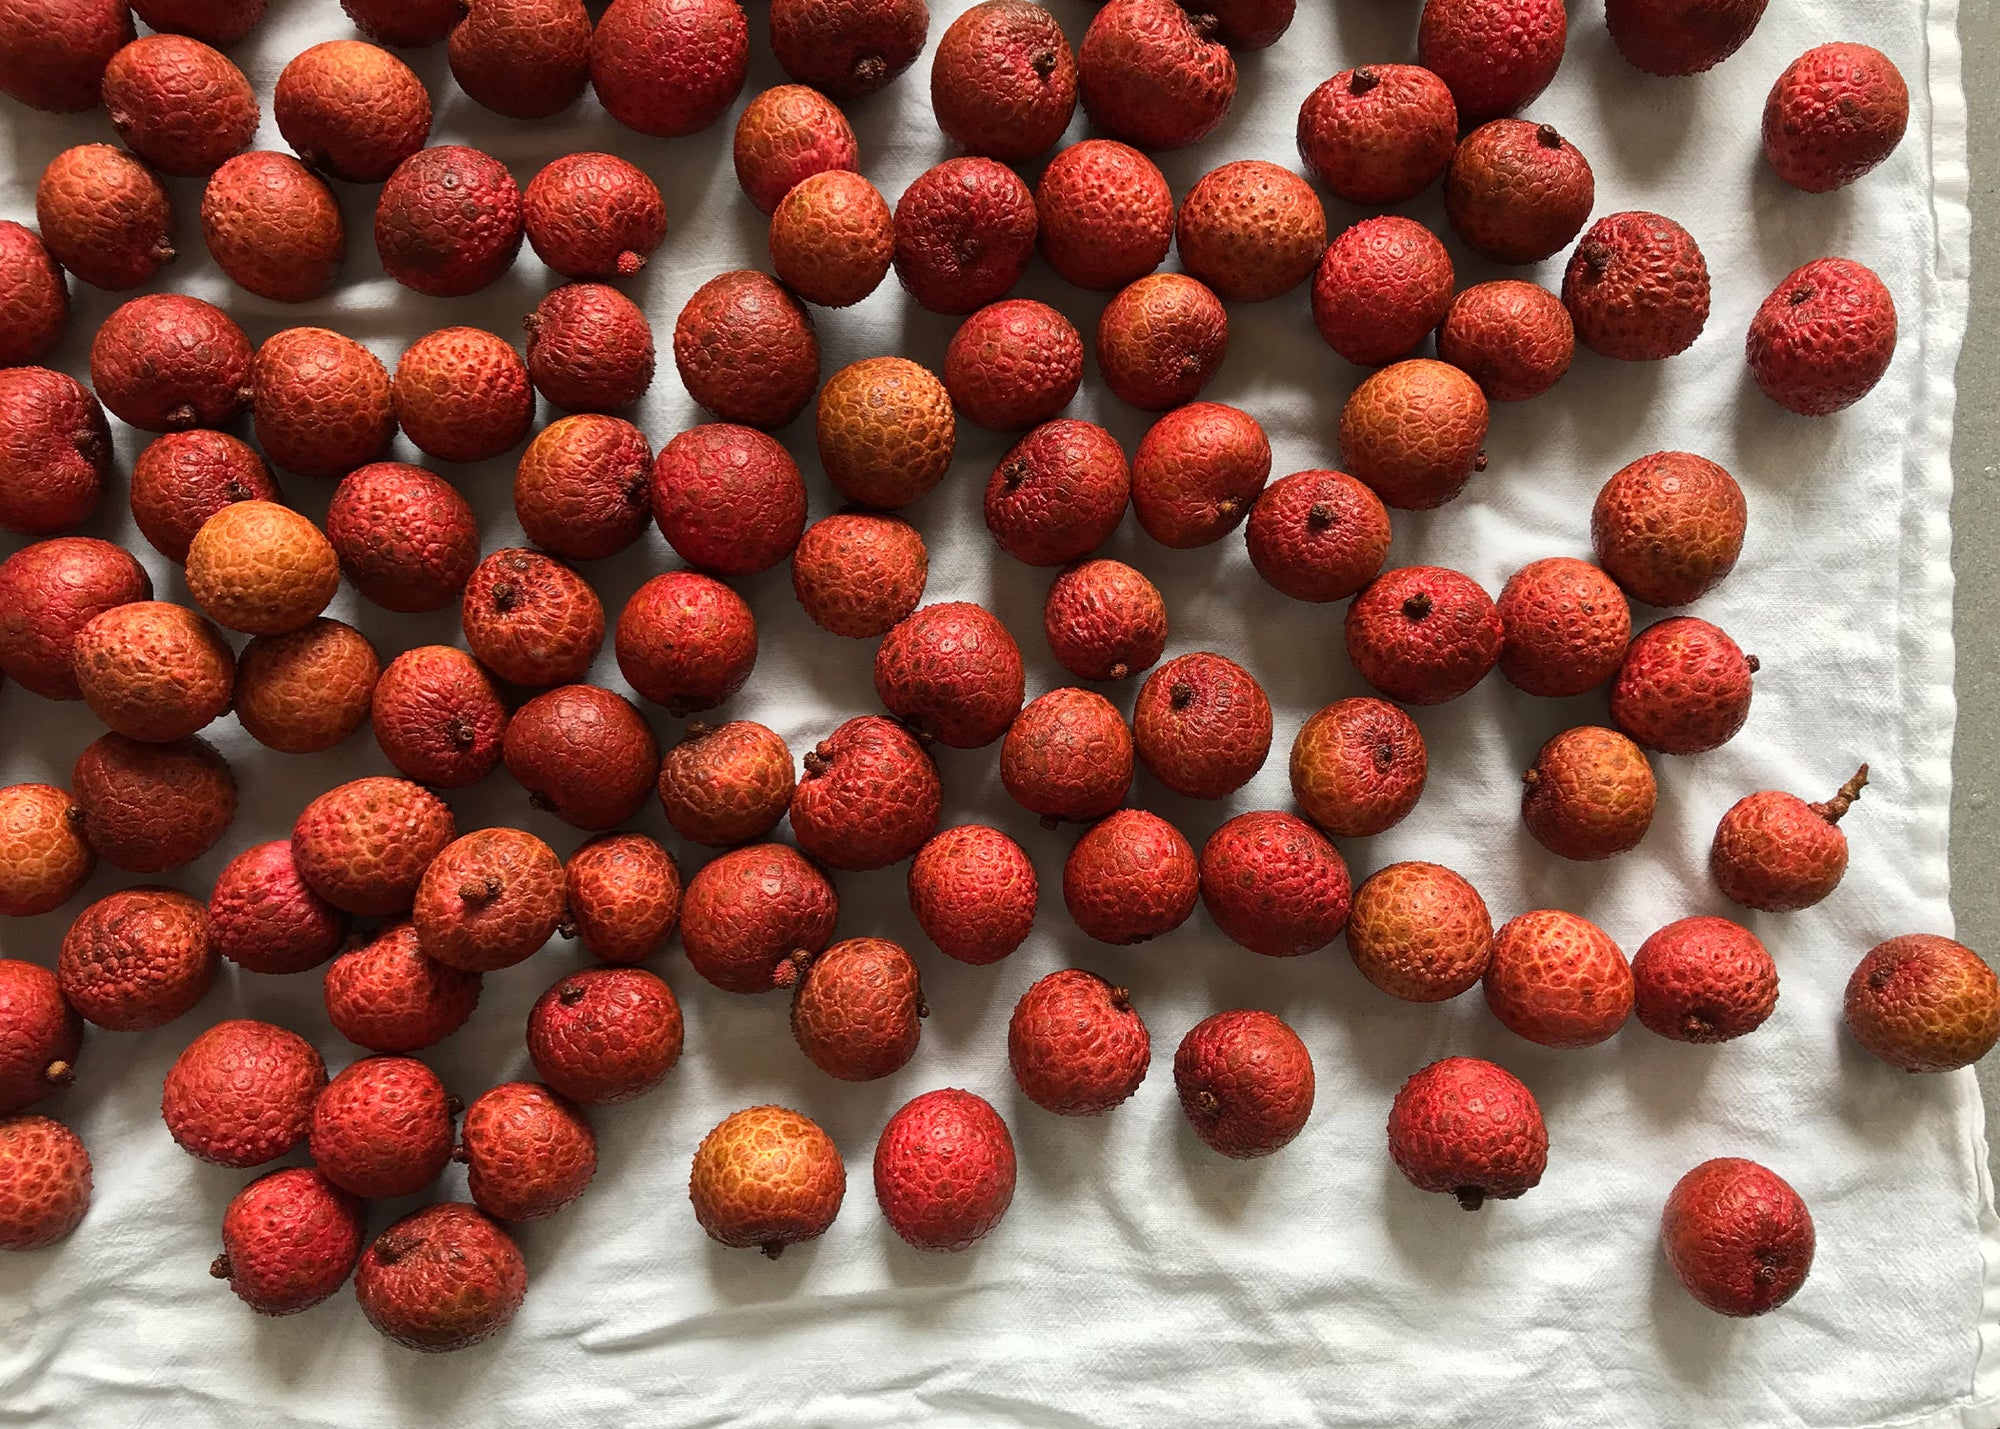 Lychee on towel, air drying after being rinsed with water.